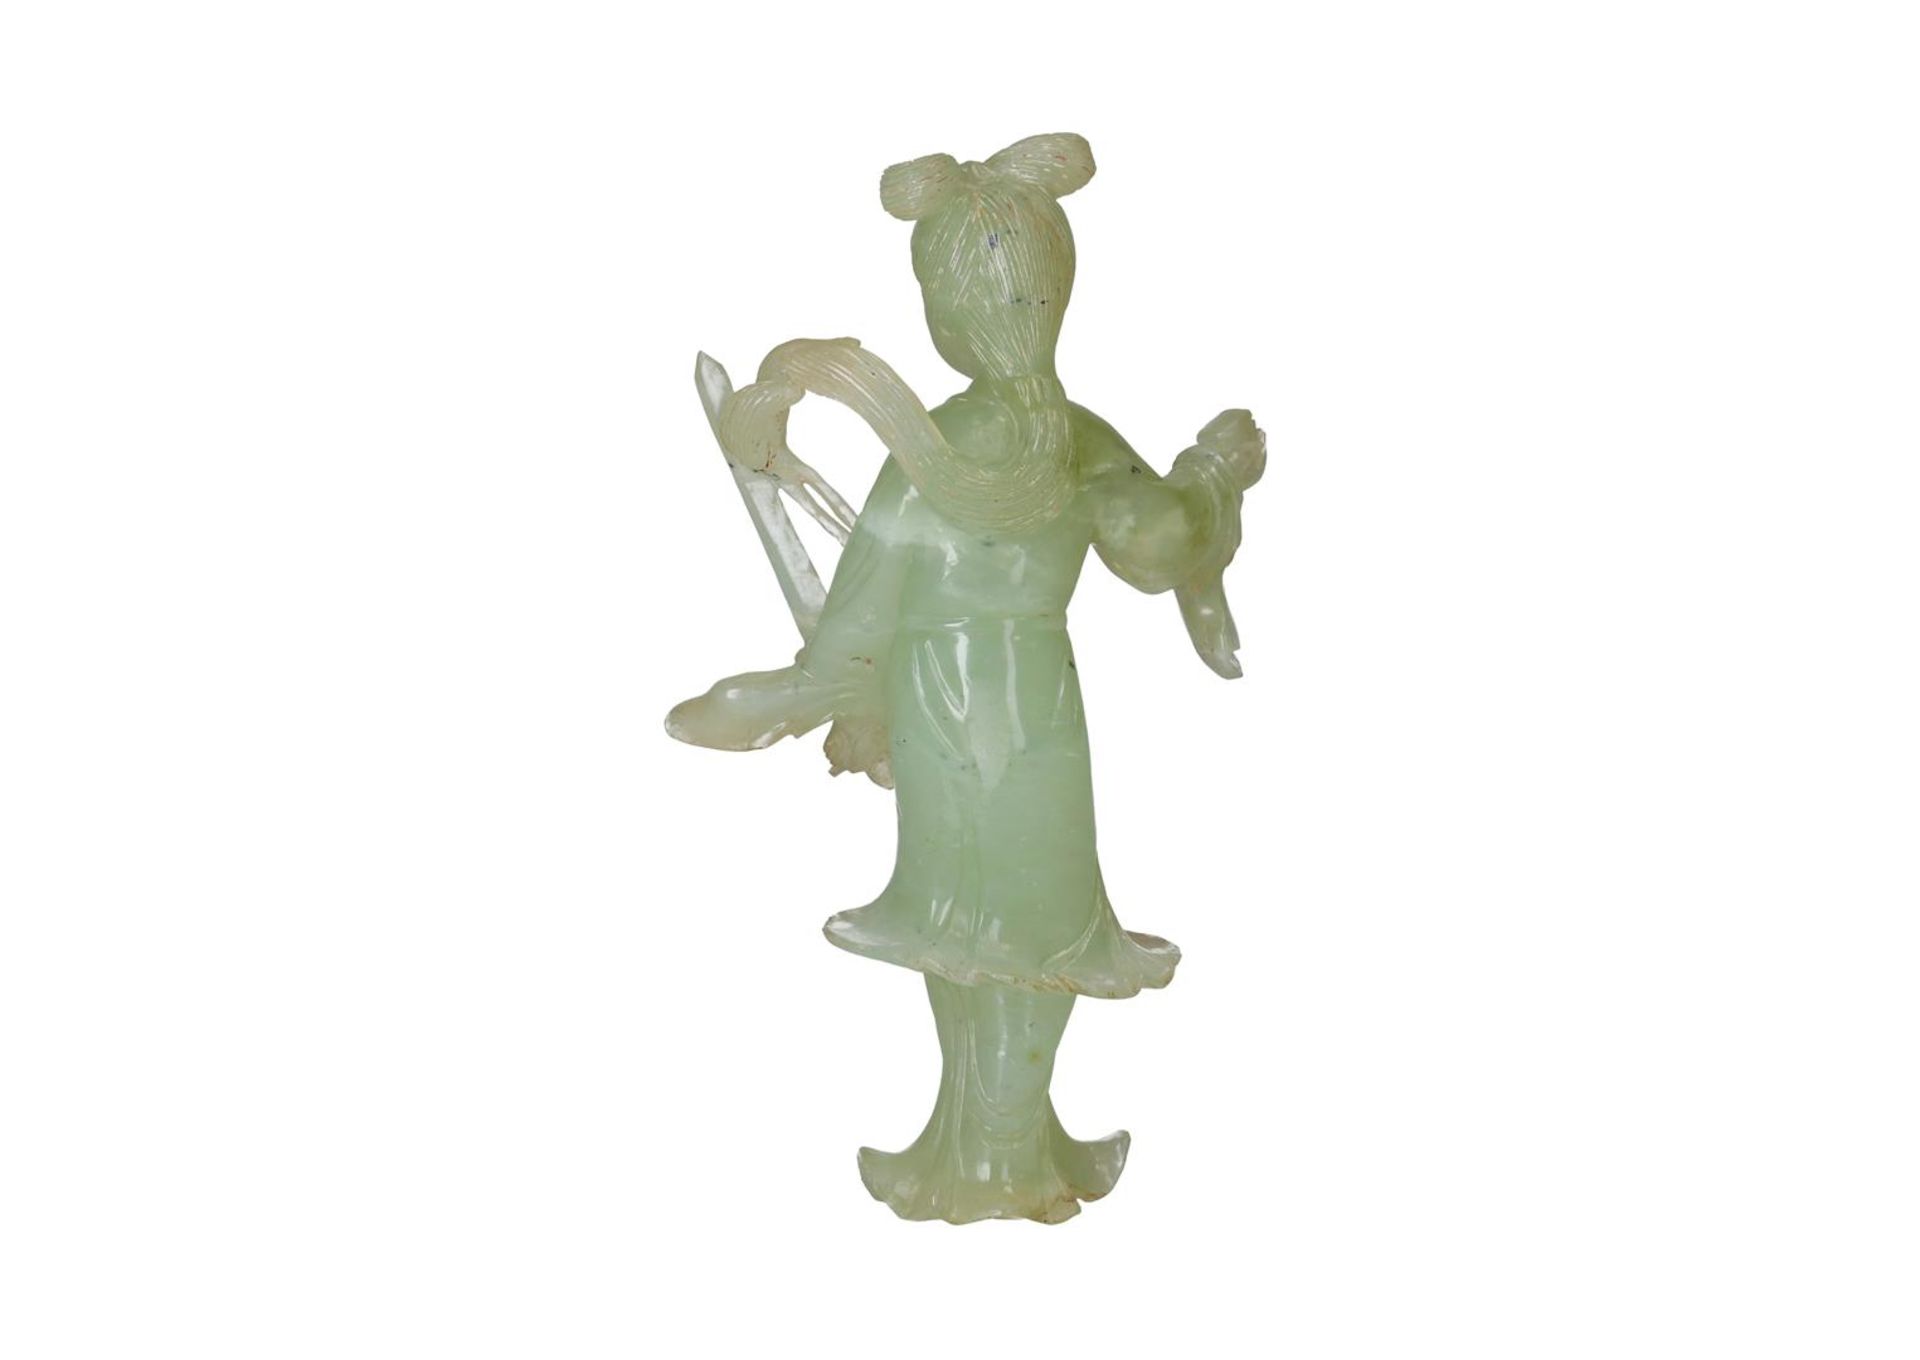 A carved jade sculpture of a woman holding valuables. China, 20th century. H. 15.5 cm. Condition - Image 2 of 4